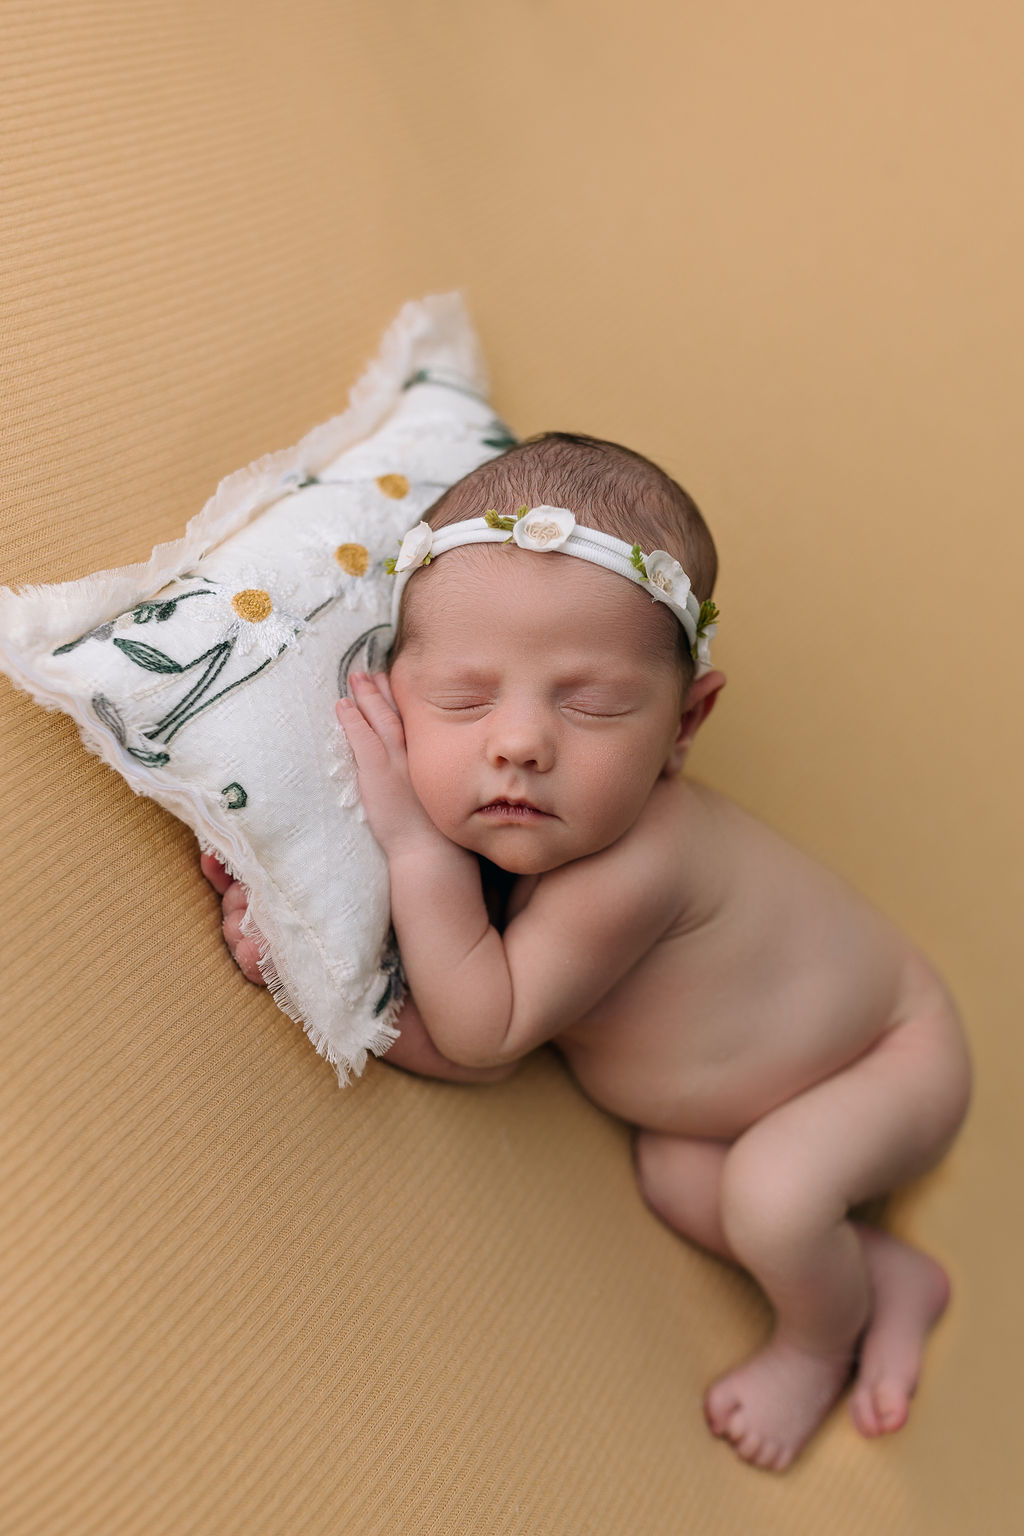 A newborn baby sleeps naked on a white daisy pillow monticello nannies